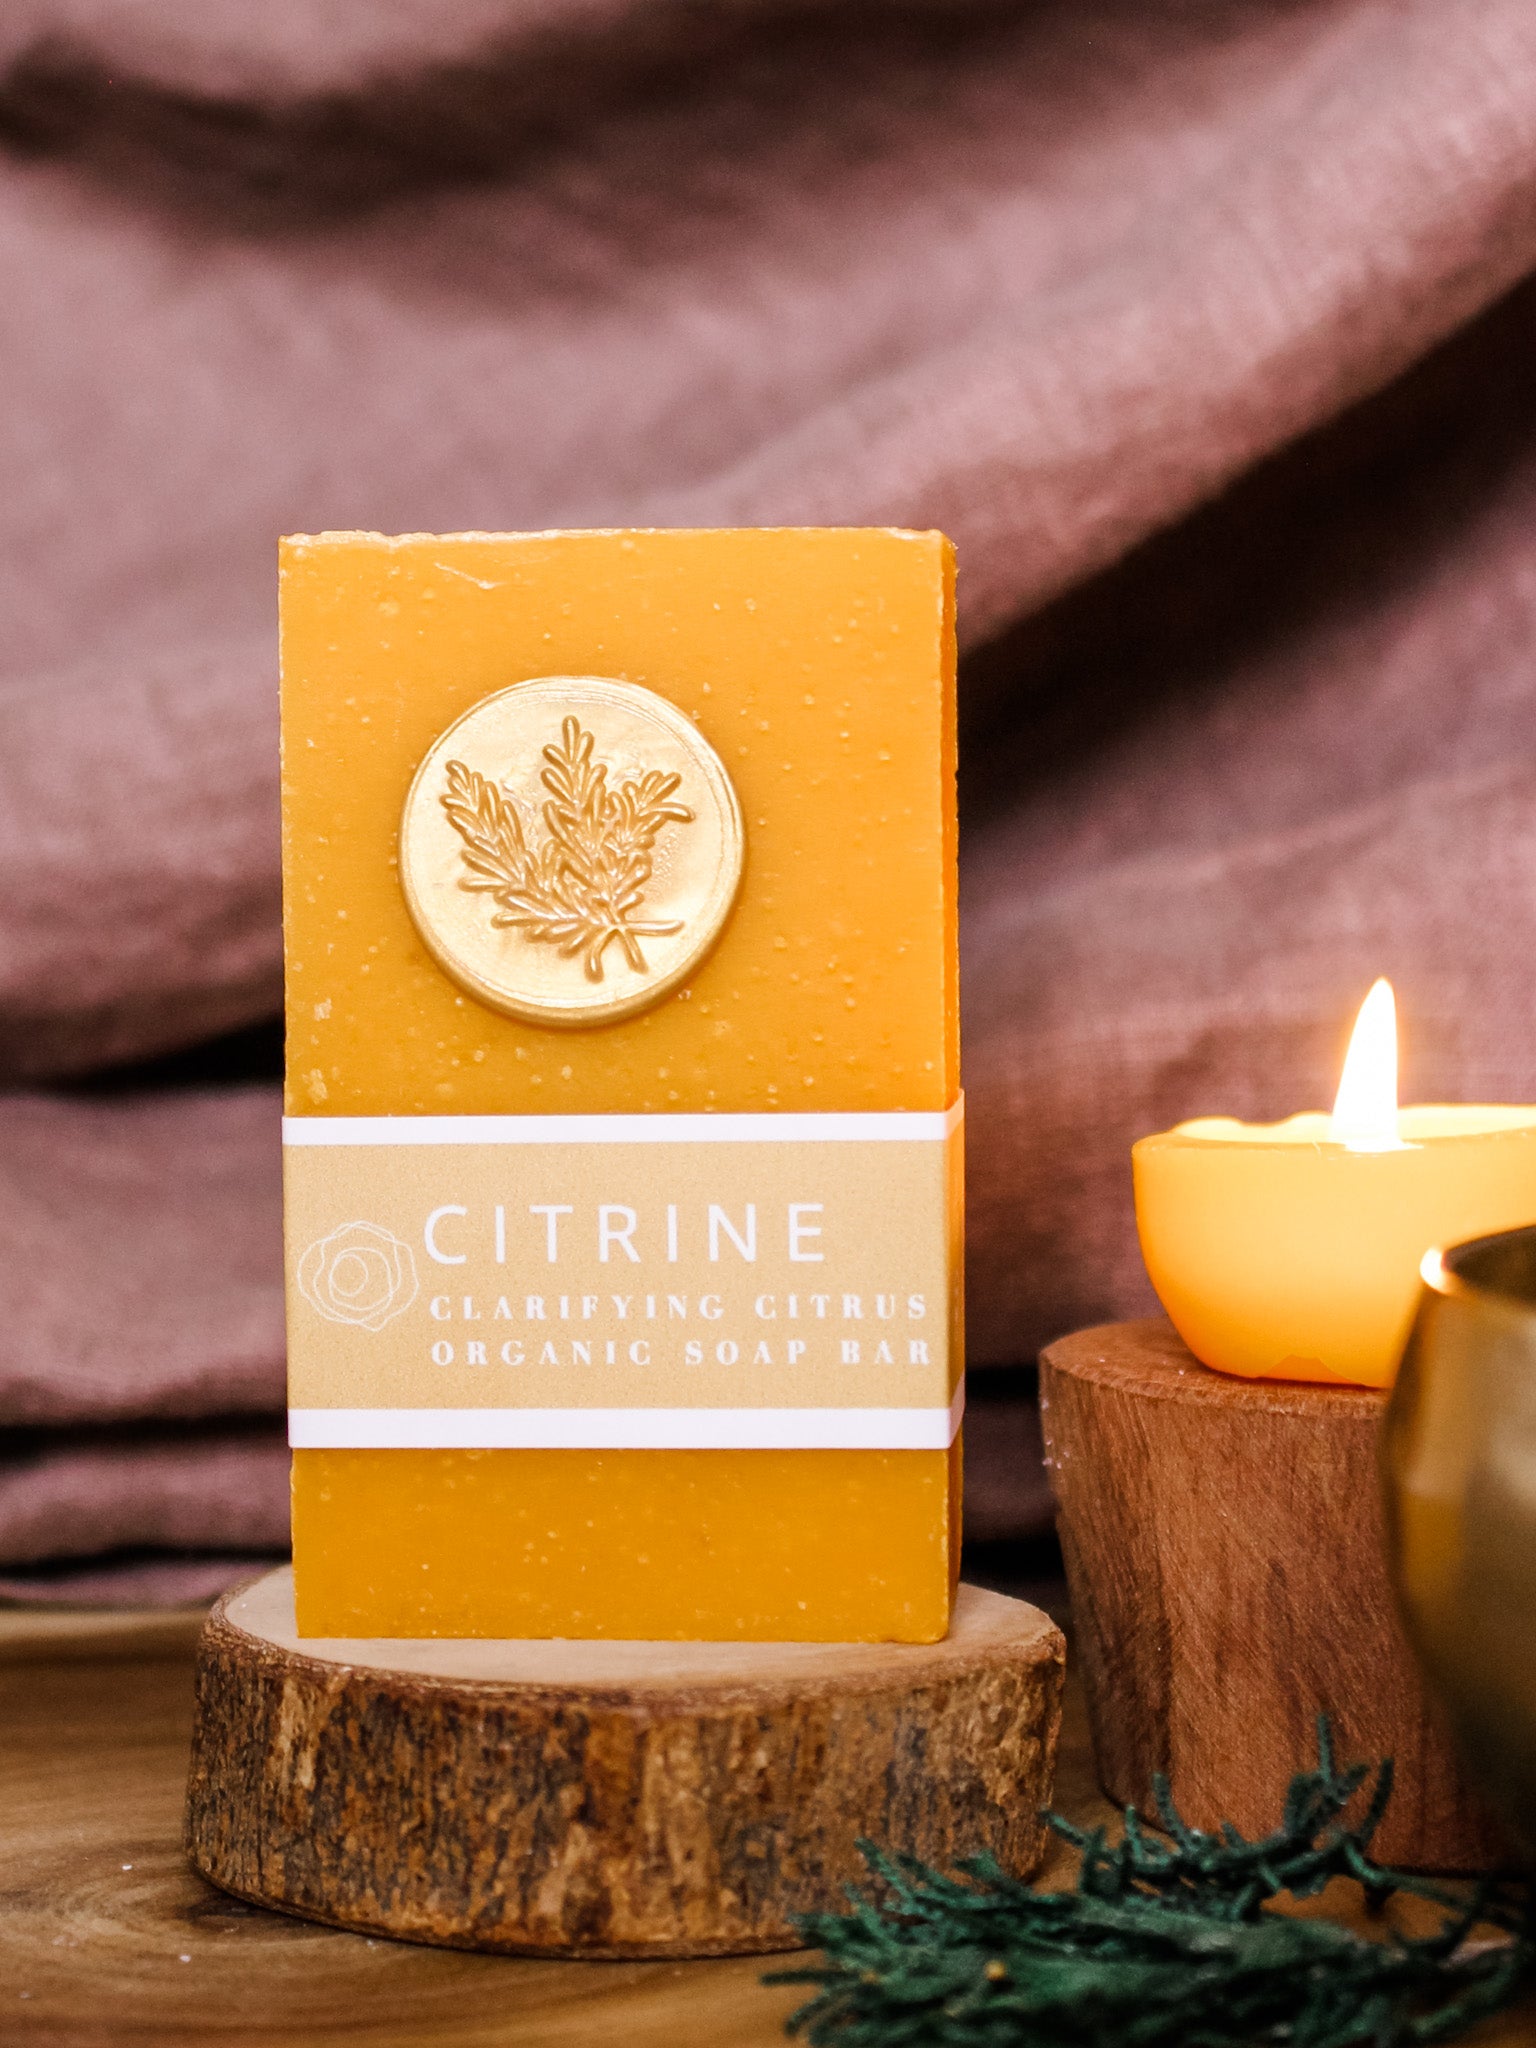 Citrine Clarifying Citrus Organic Bar Soap - Handmade with Natural Ingredients. Hidden Forest Naturals